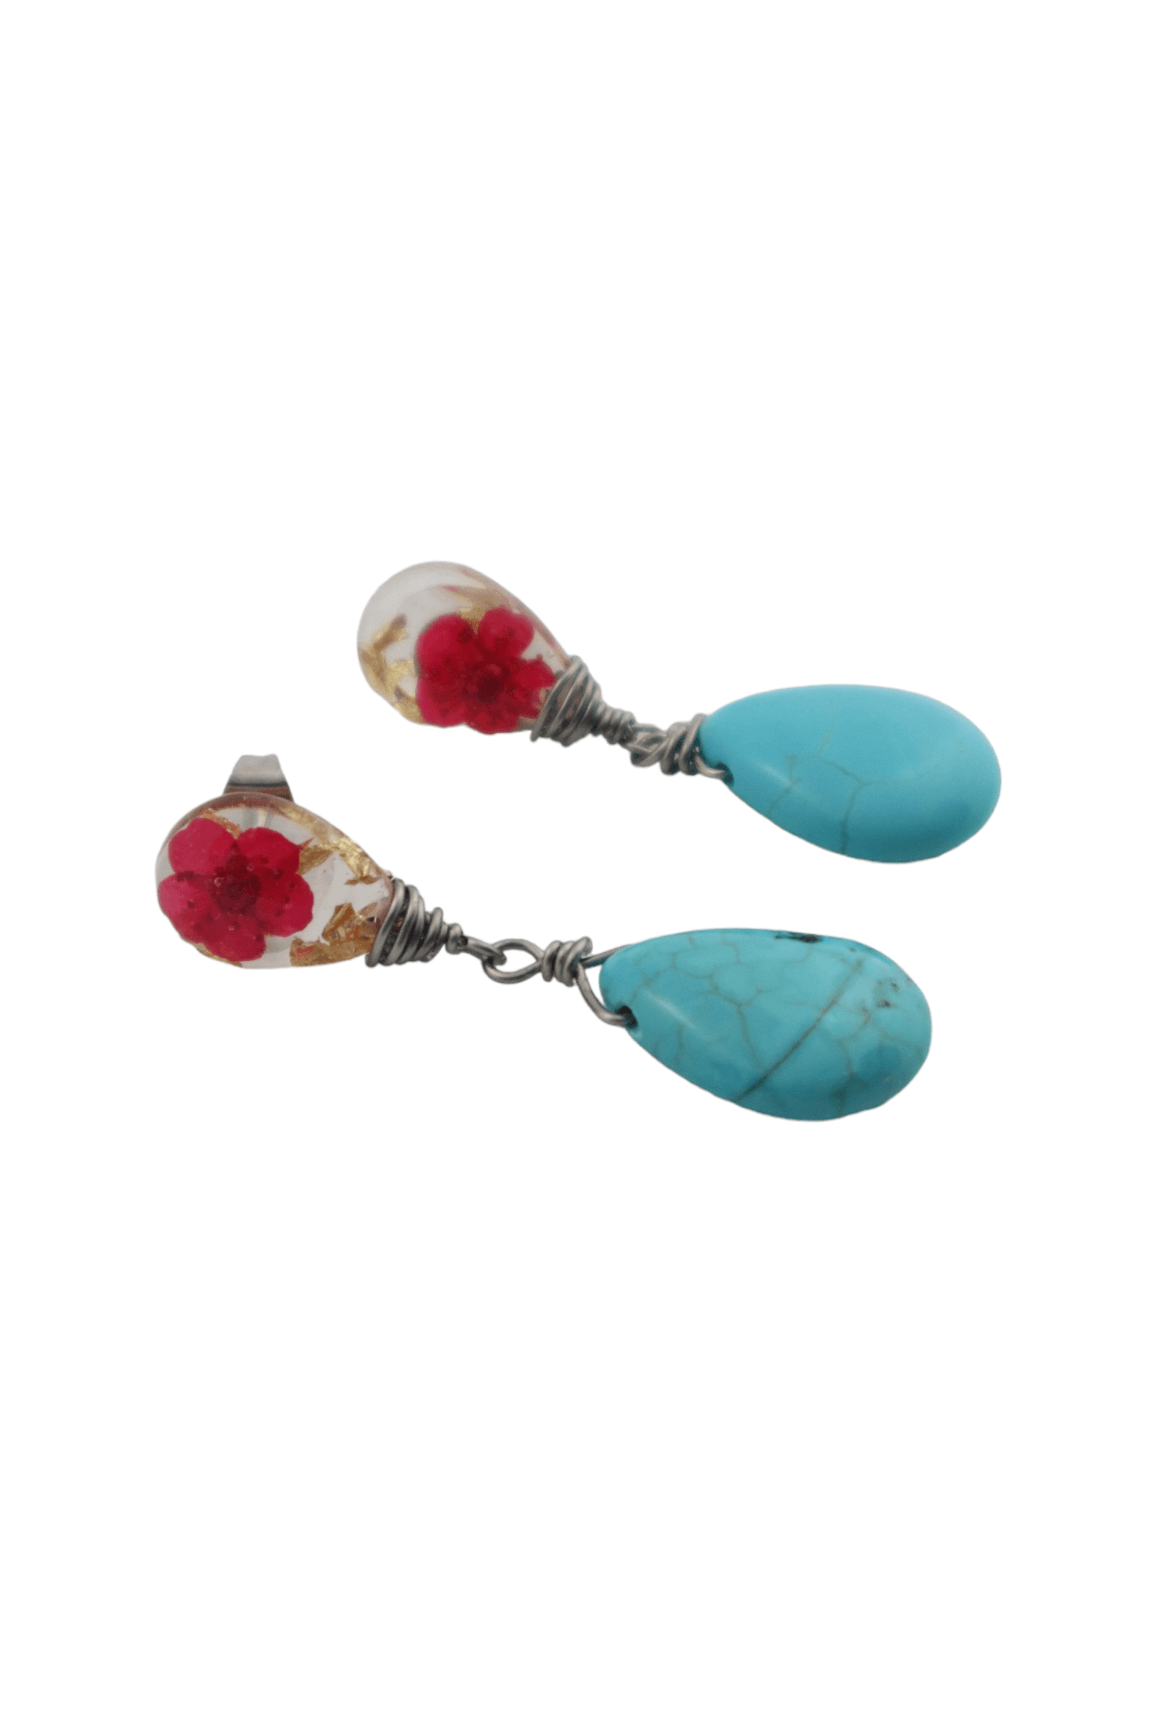 Jewelry-with-flowers---turquoise-earrings-studs---flower-jewelry---Kaleidoscopes-And-Polka-Dots